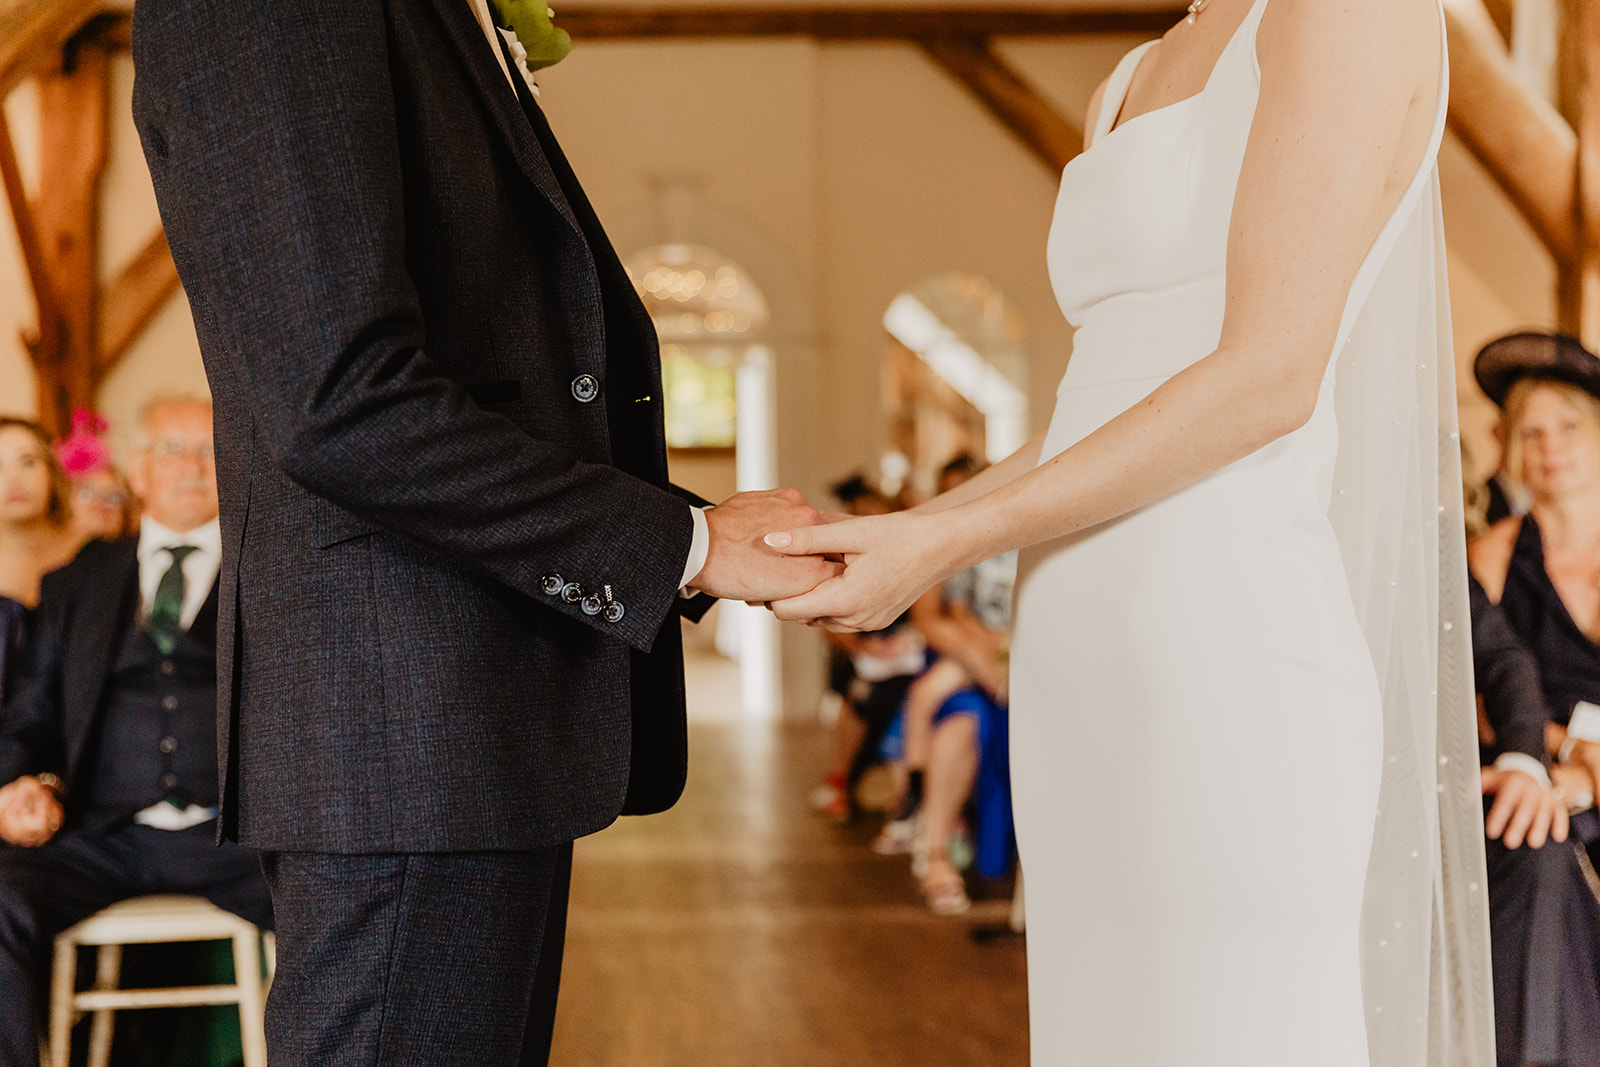 Bride and Groom holding hands during vow at a Bury Manor Barn Wedding in Sussex. Photographer OliveJoy Photography.